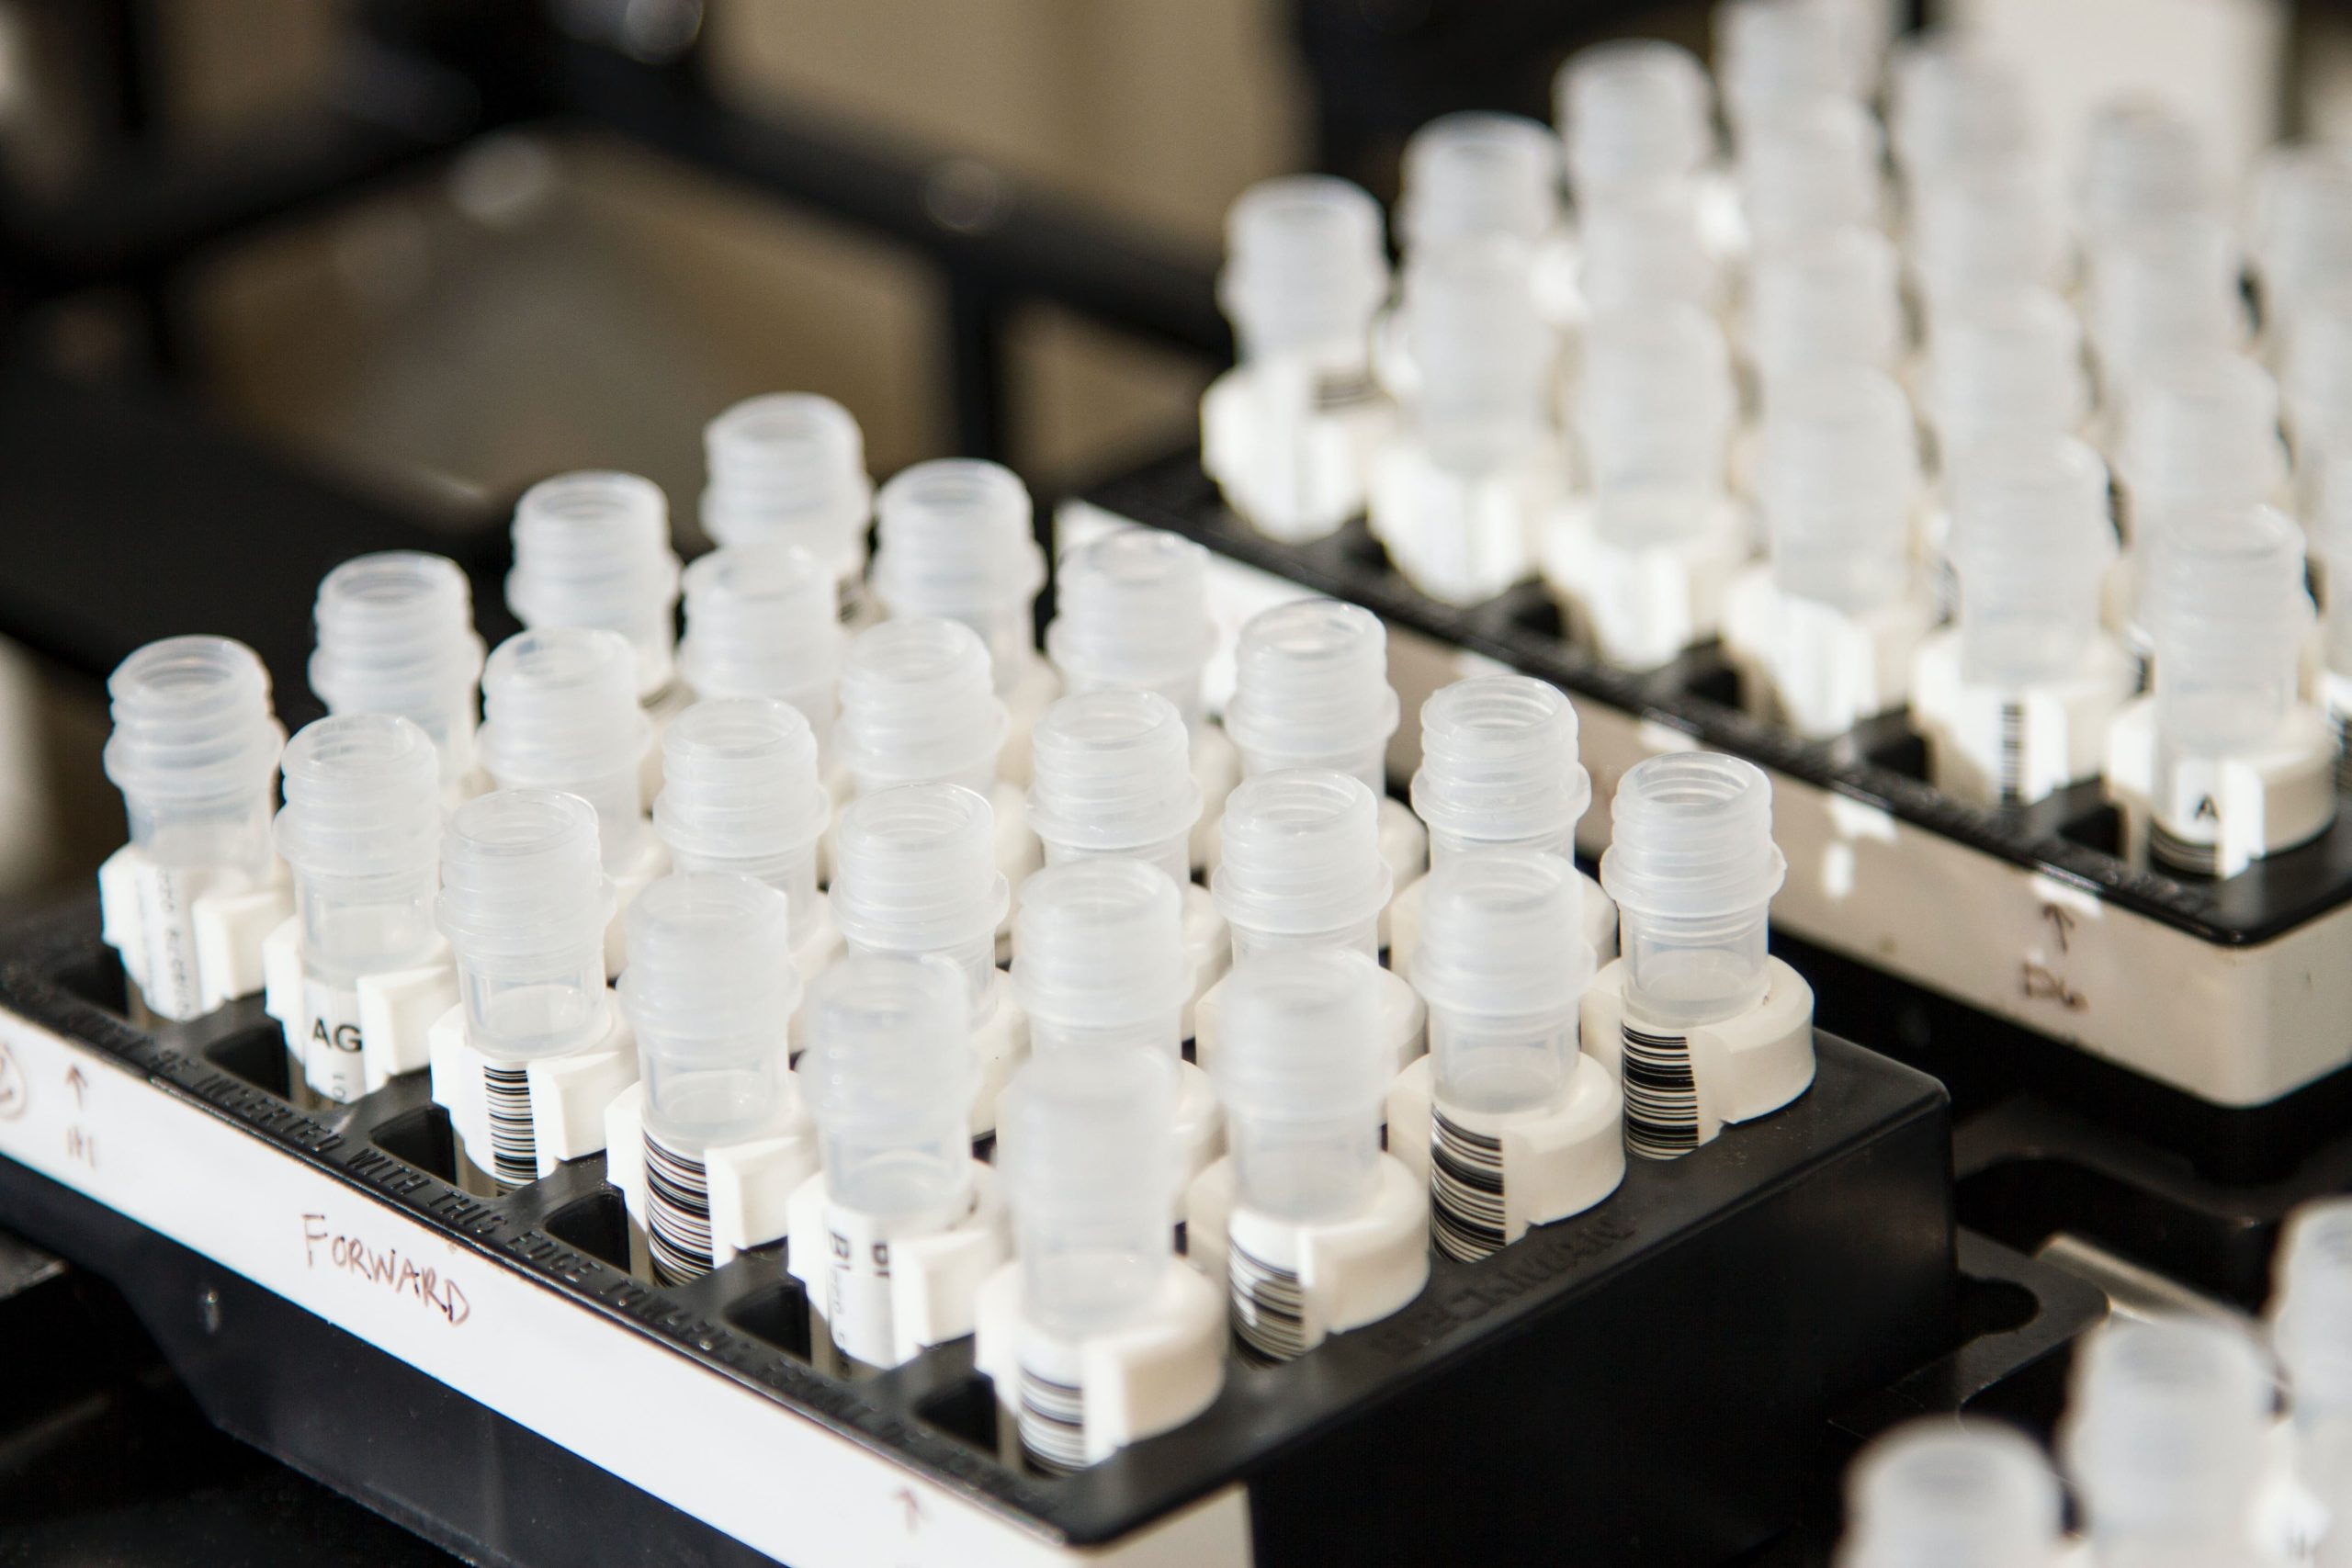 Vials containing DNA samples from studies of the genetic risk for cancer at the Cancer Genomics Research Laboratory, part of the National Cancer Institute's Division of Cancer Epidemiology and Genetics (DCEG)